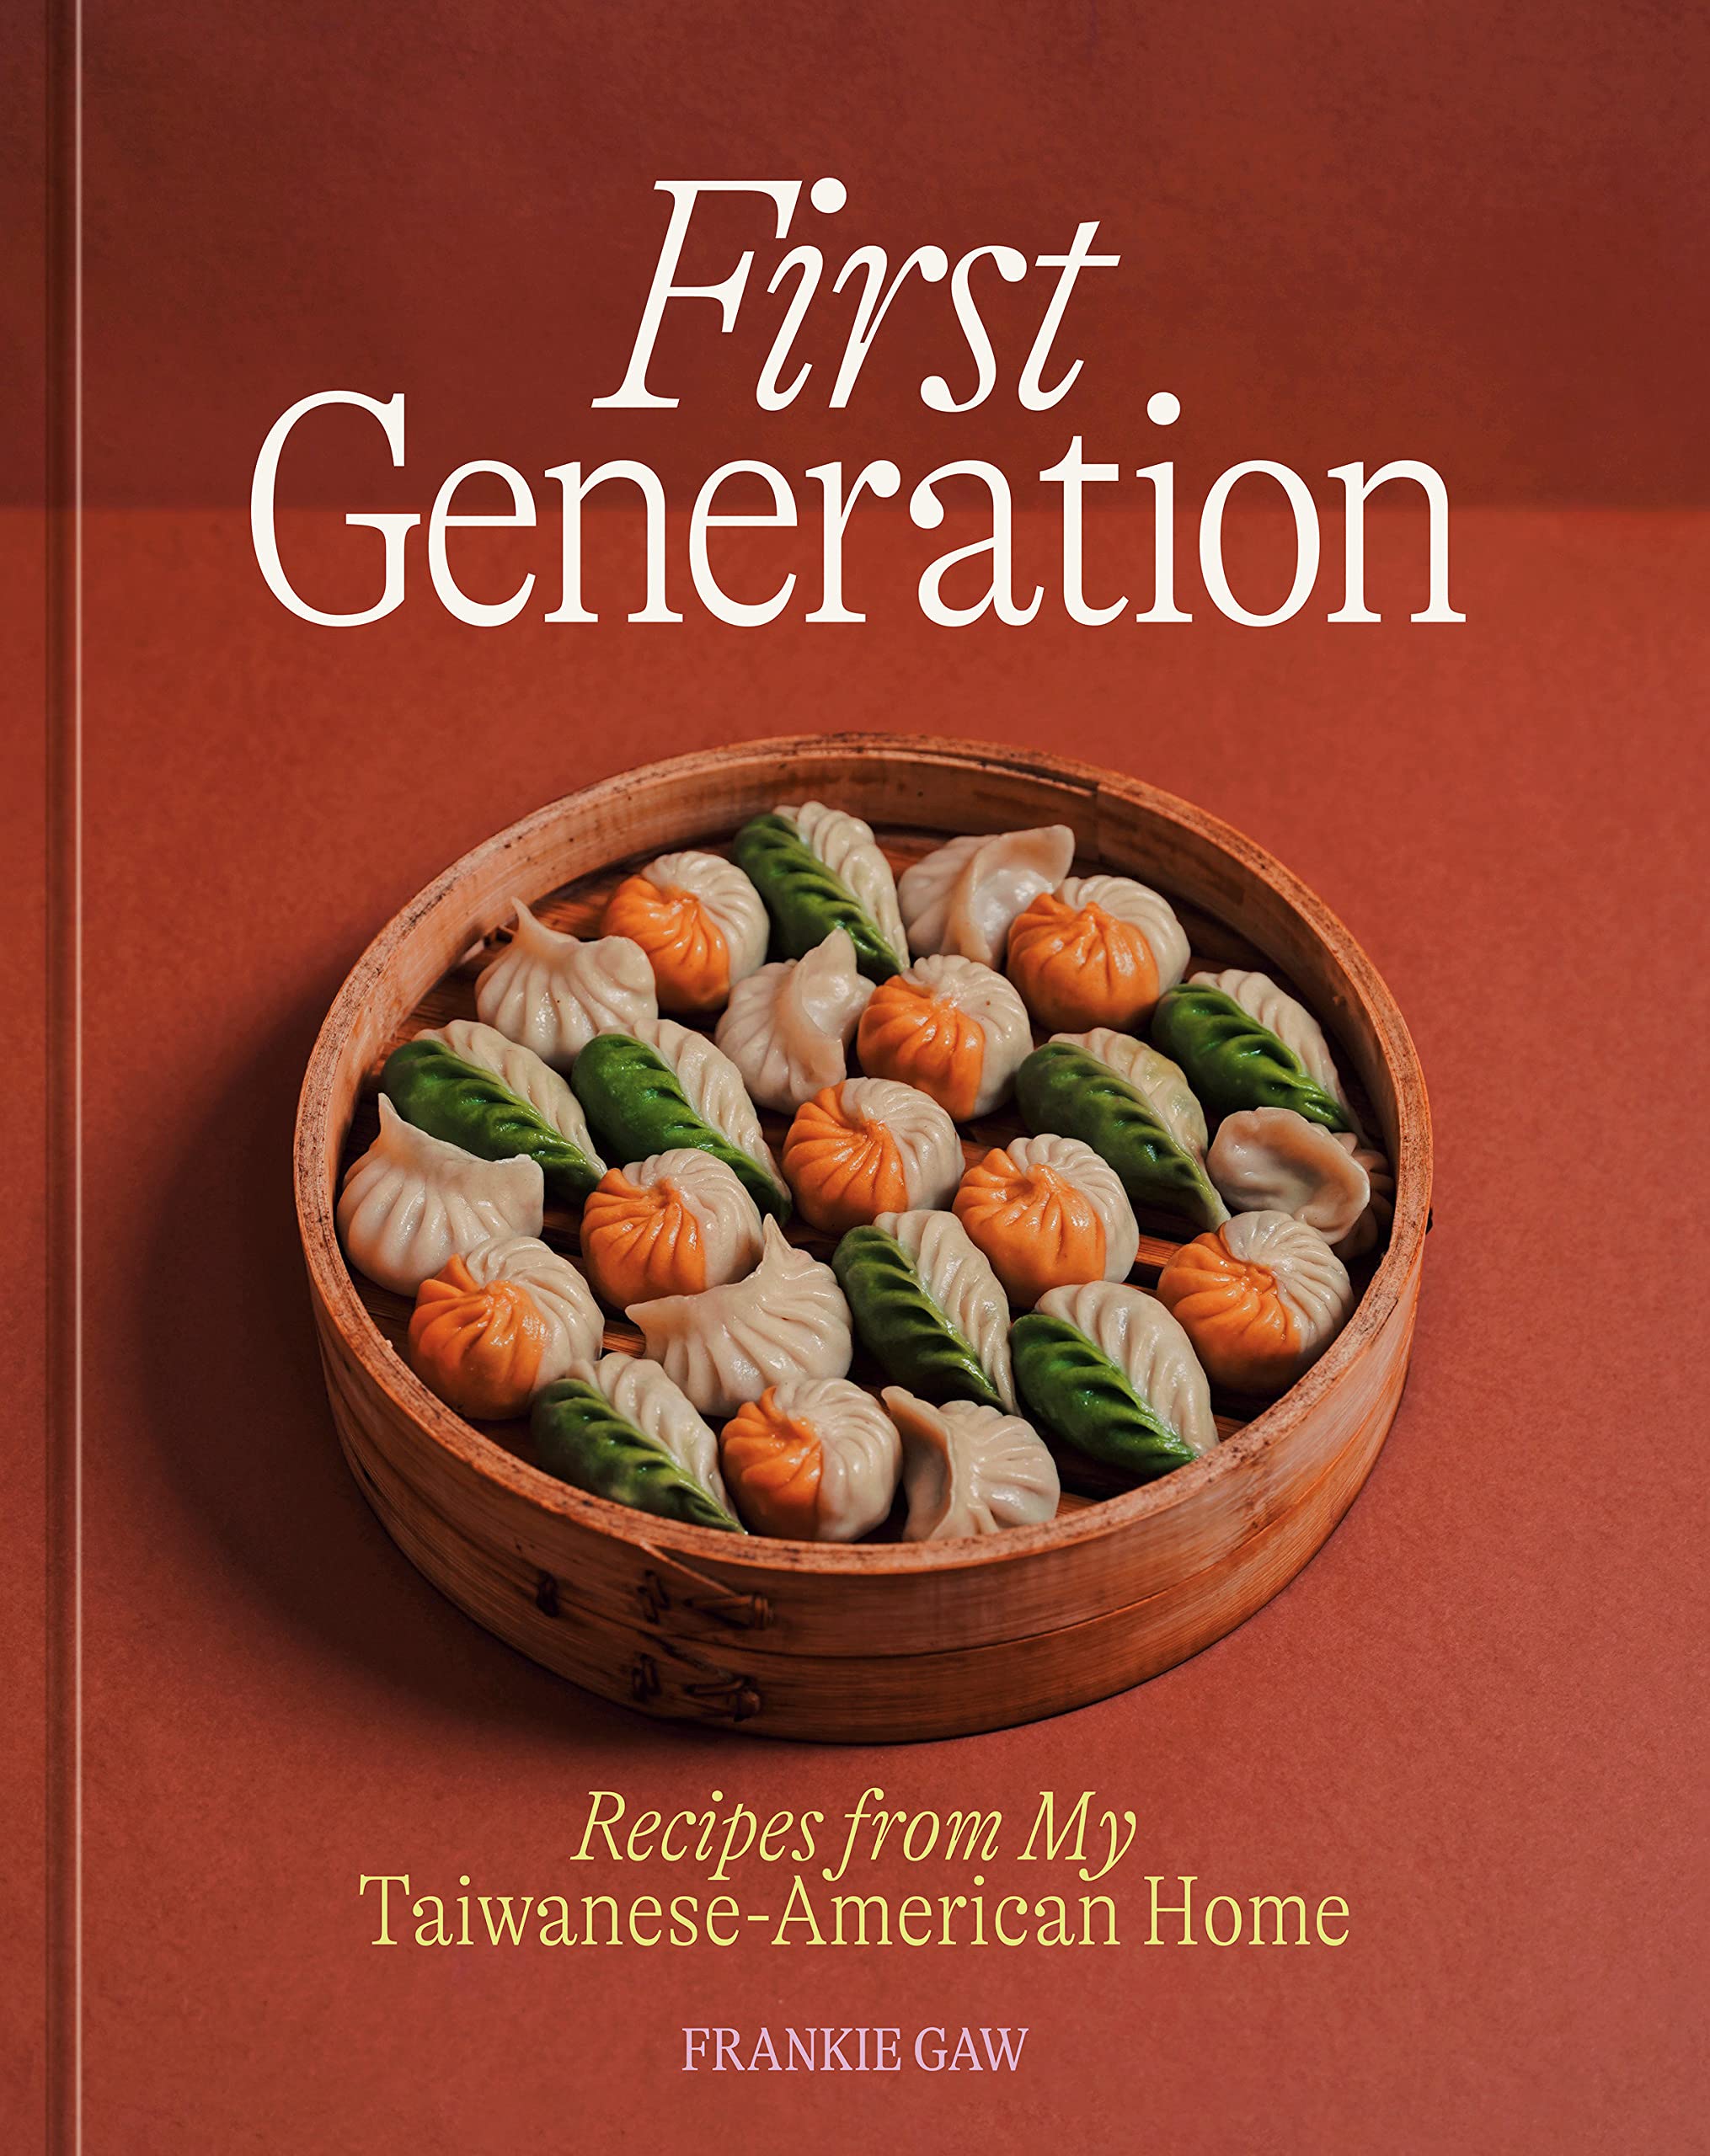 First Generation: Recipes from My Taiwanese-American Home (Frankie Gaw) *Signed*